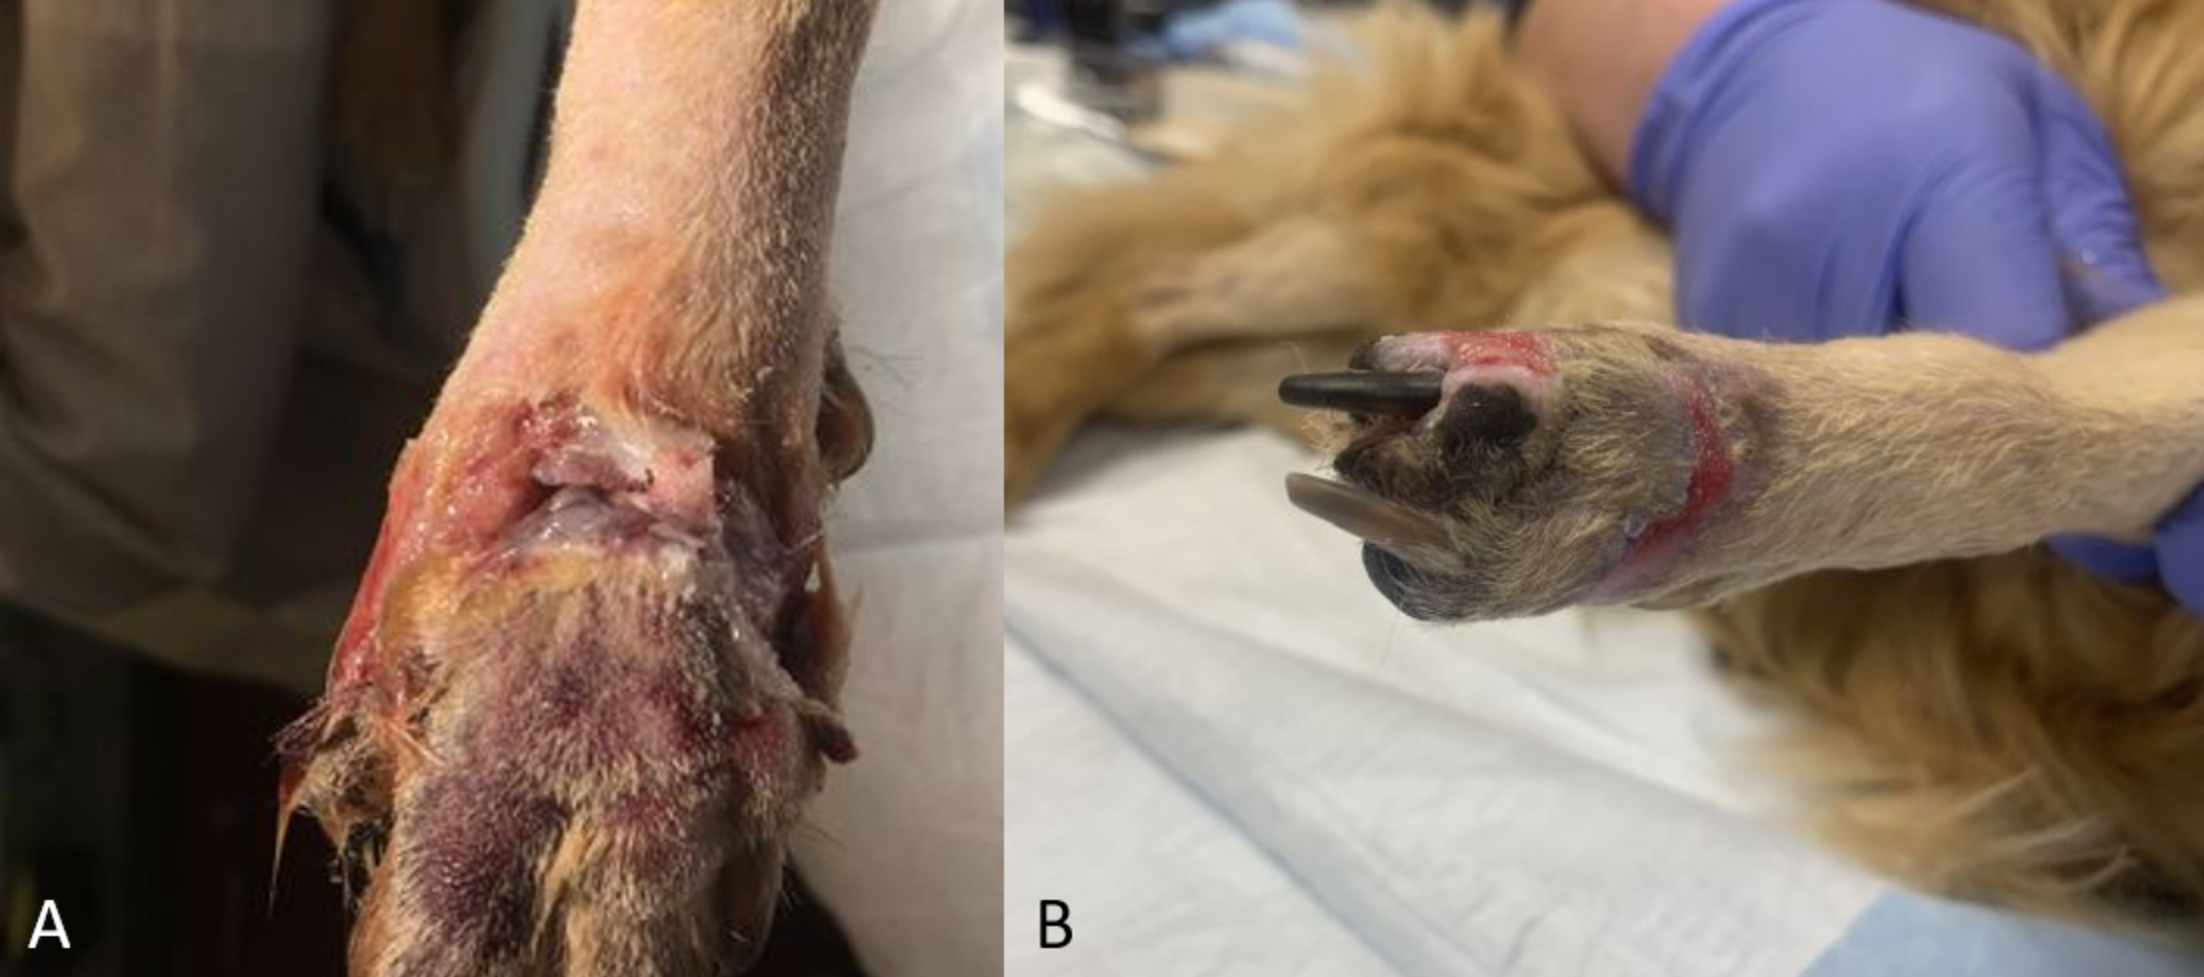 Figure 1. A. Pomeranian dog presenting with a shearing injury and open fractures of the third and fourth metacarpal bones. B. Two weeks after amputation of digits 3 and 4 at the level of the fracture site. Skin from the third digit and digital pad were used to close the defect; small areas were left to heal by second intention and have healthy granulation tissue. The dog recovered well and did not have lameness associated with the affected limb.